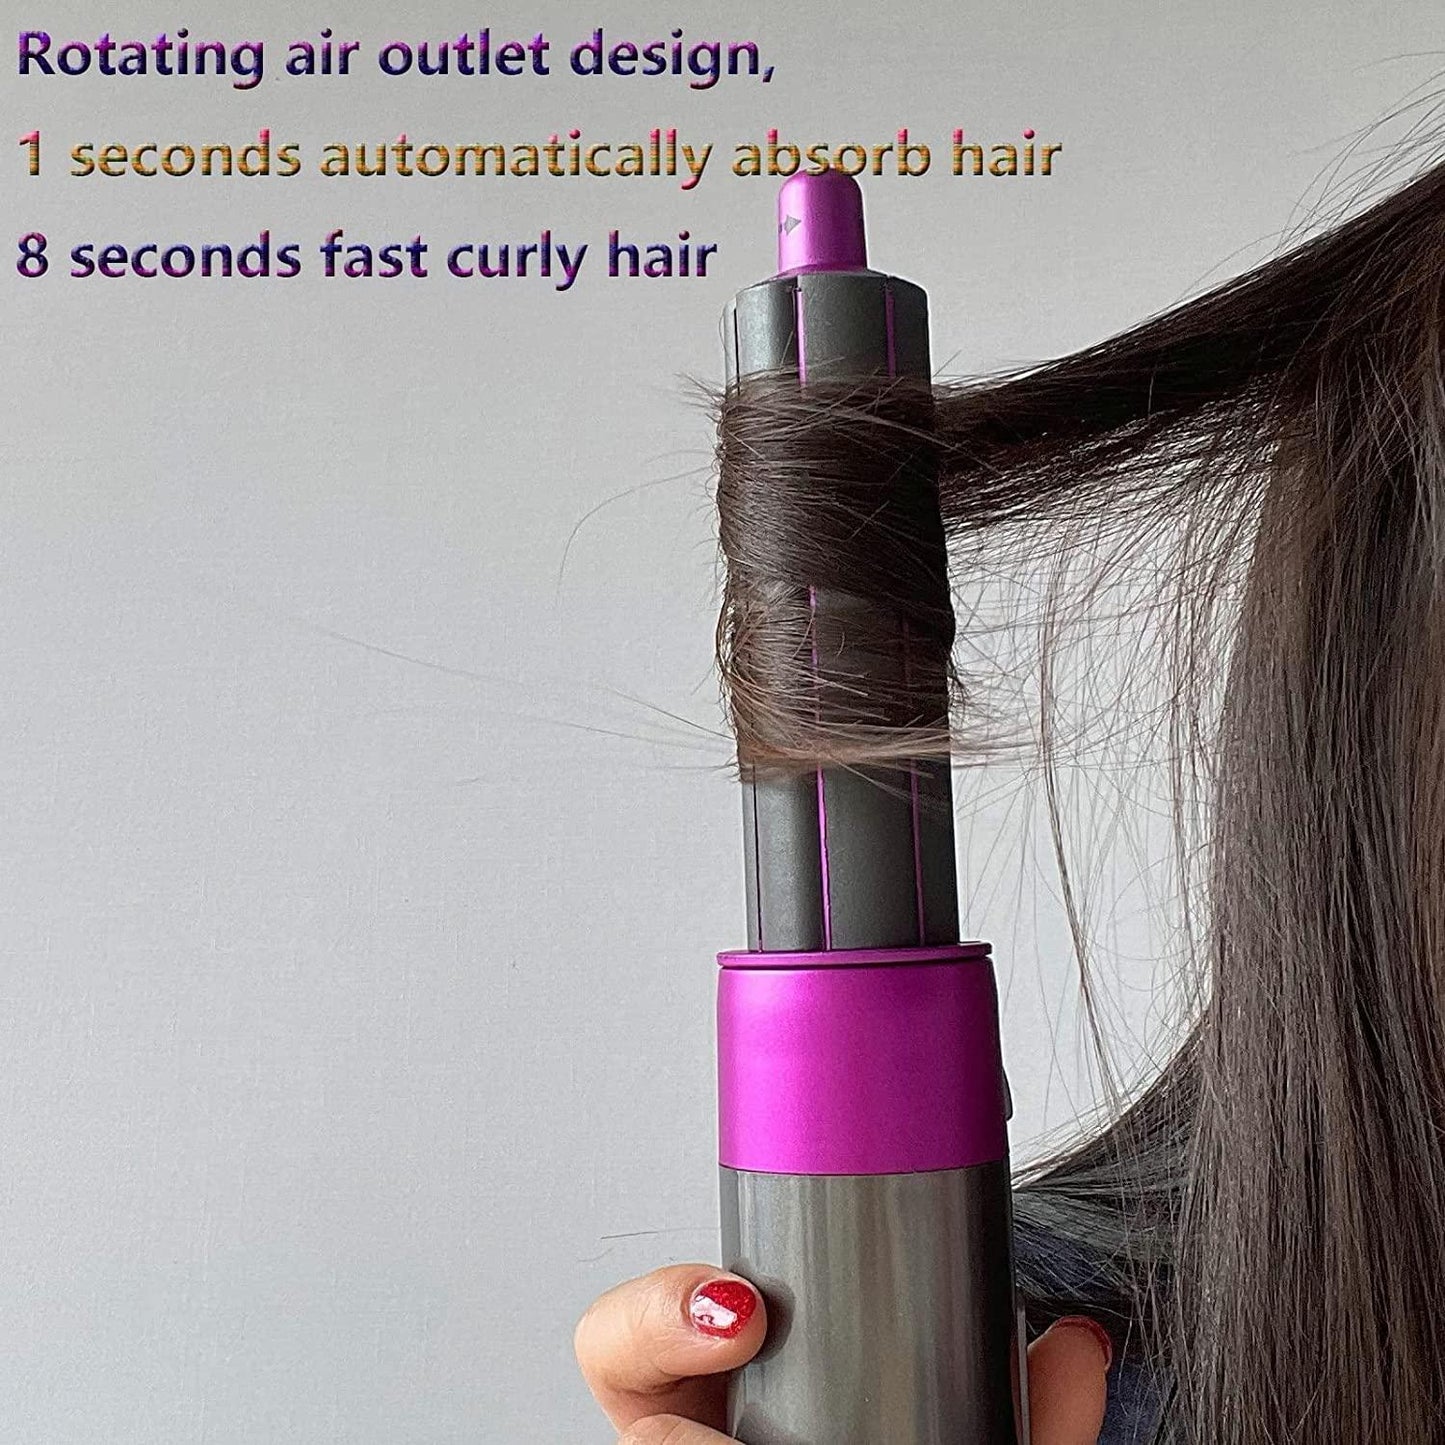 5 In 1 Hot Air Brush and Dryer